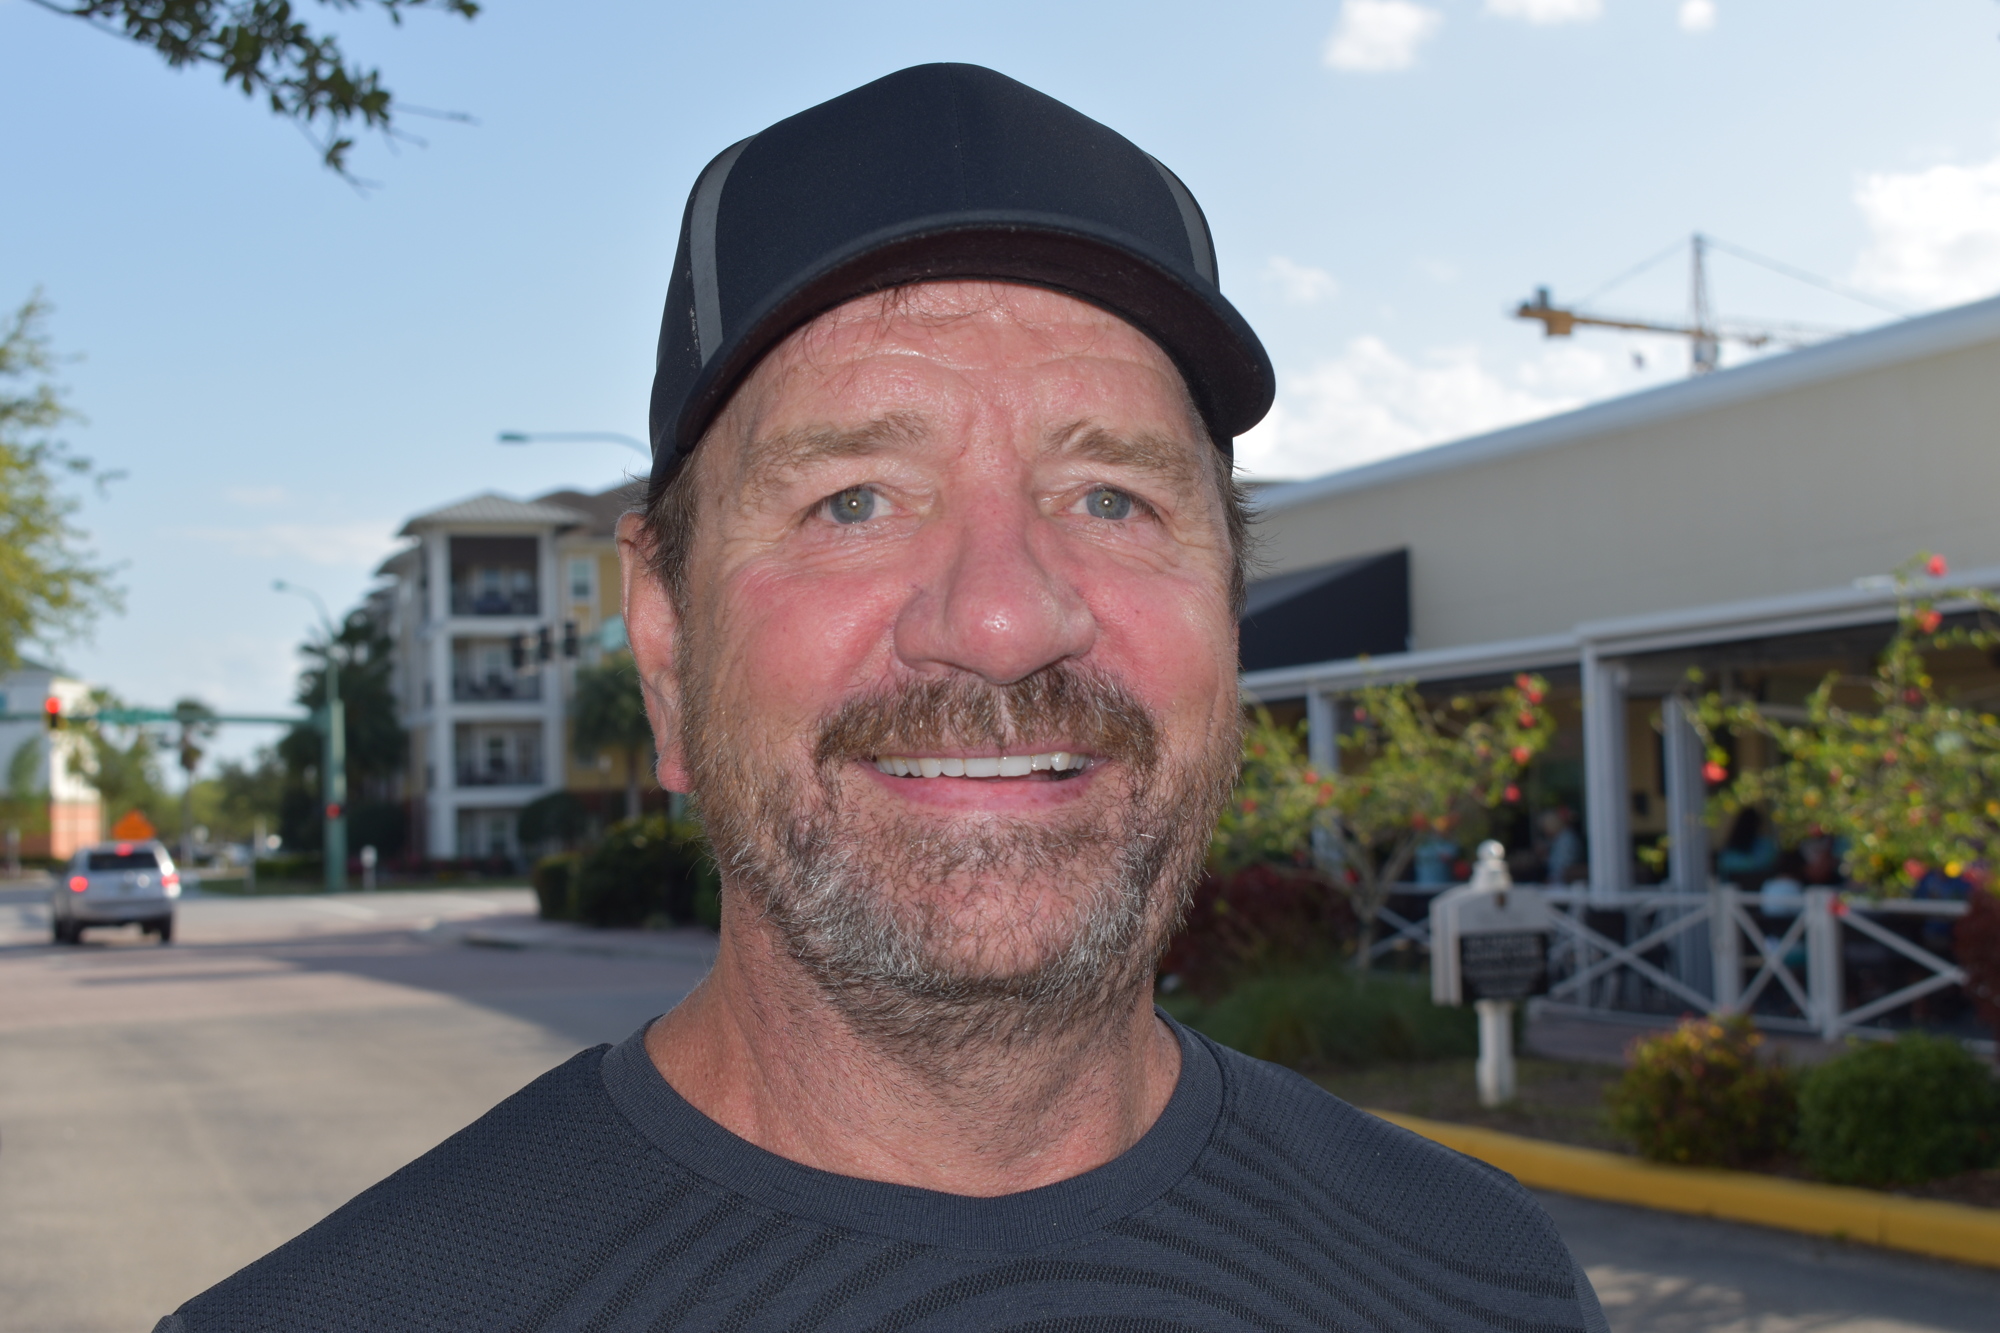 After striking a chunk of aggregate rock on Bourneside Boulevard, Rick Hardesty broke his clavicle and three ribs.